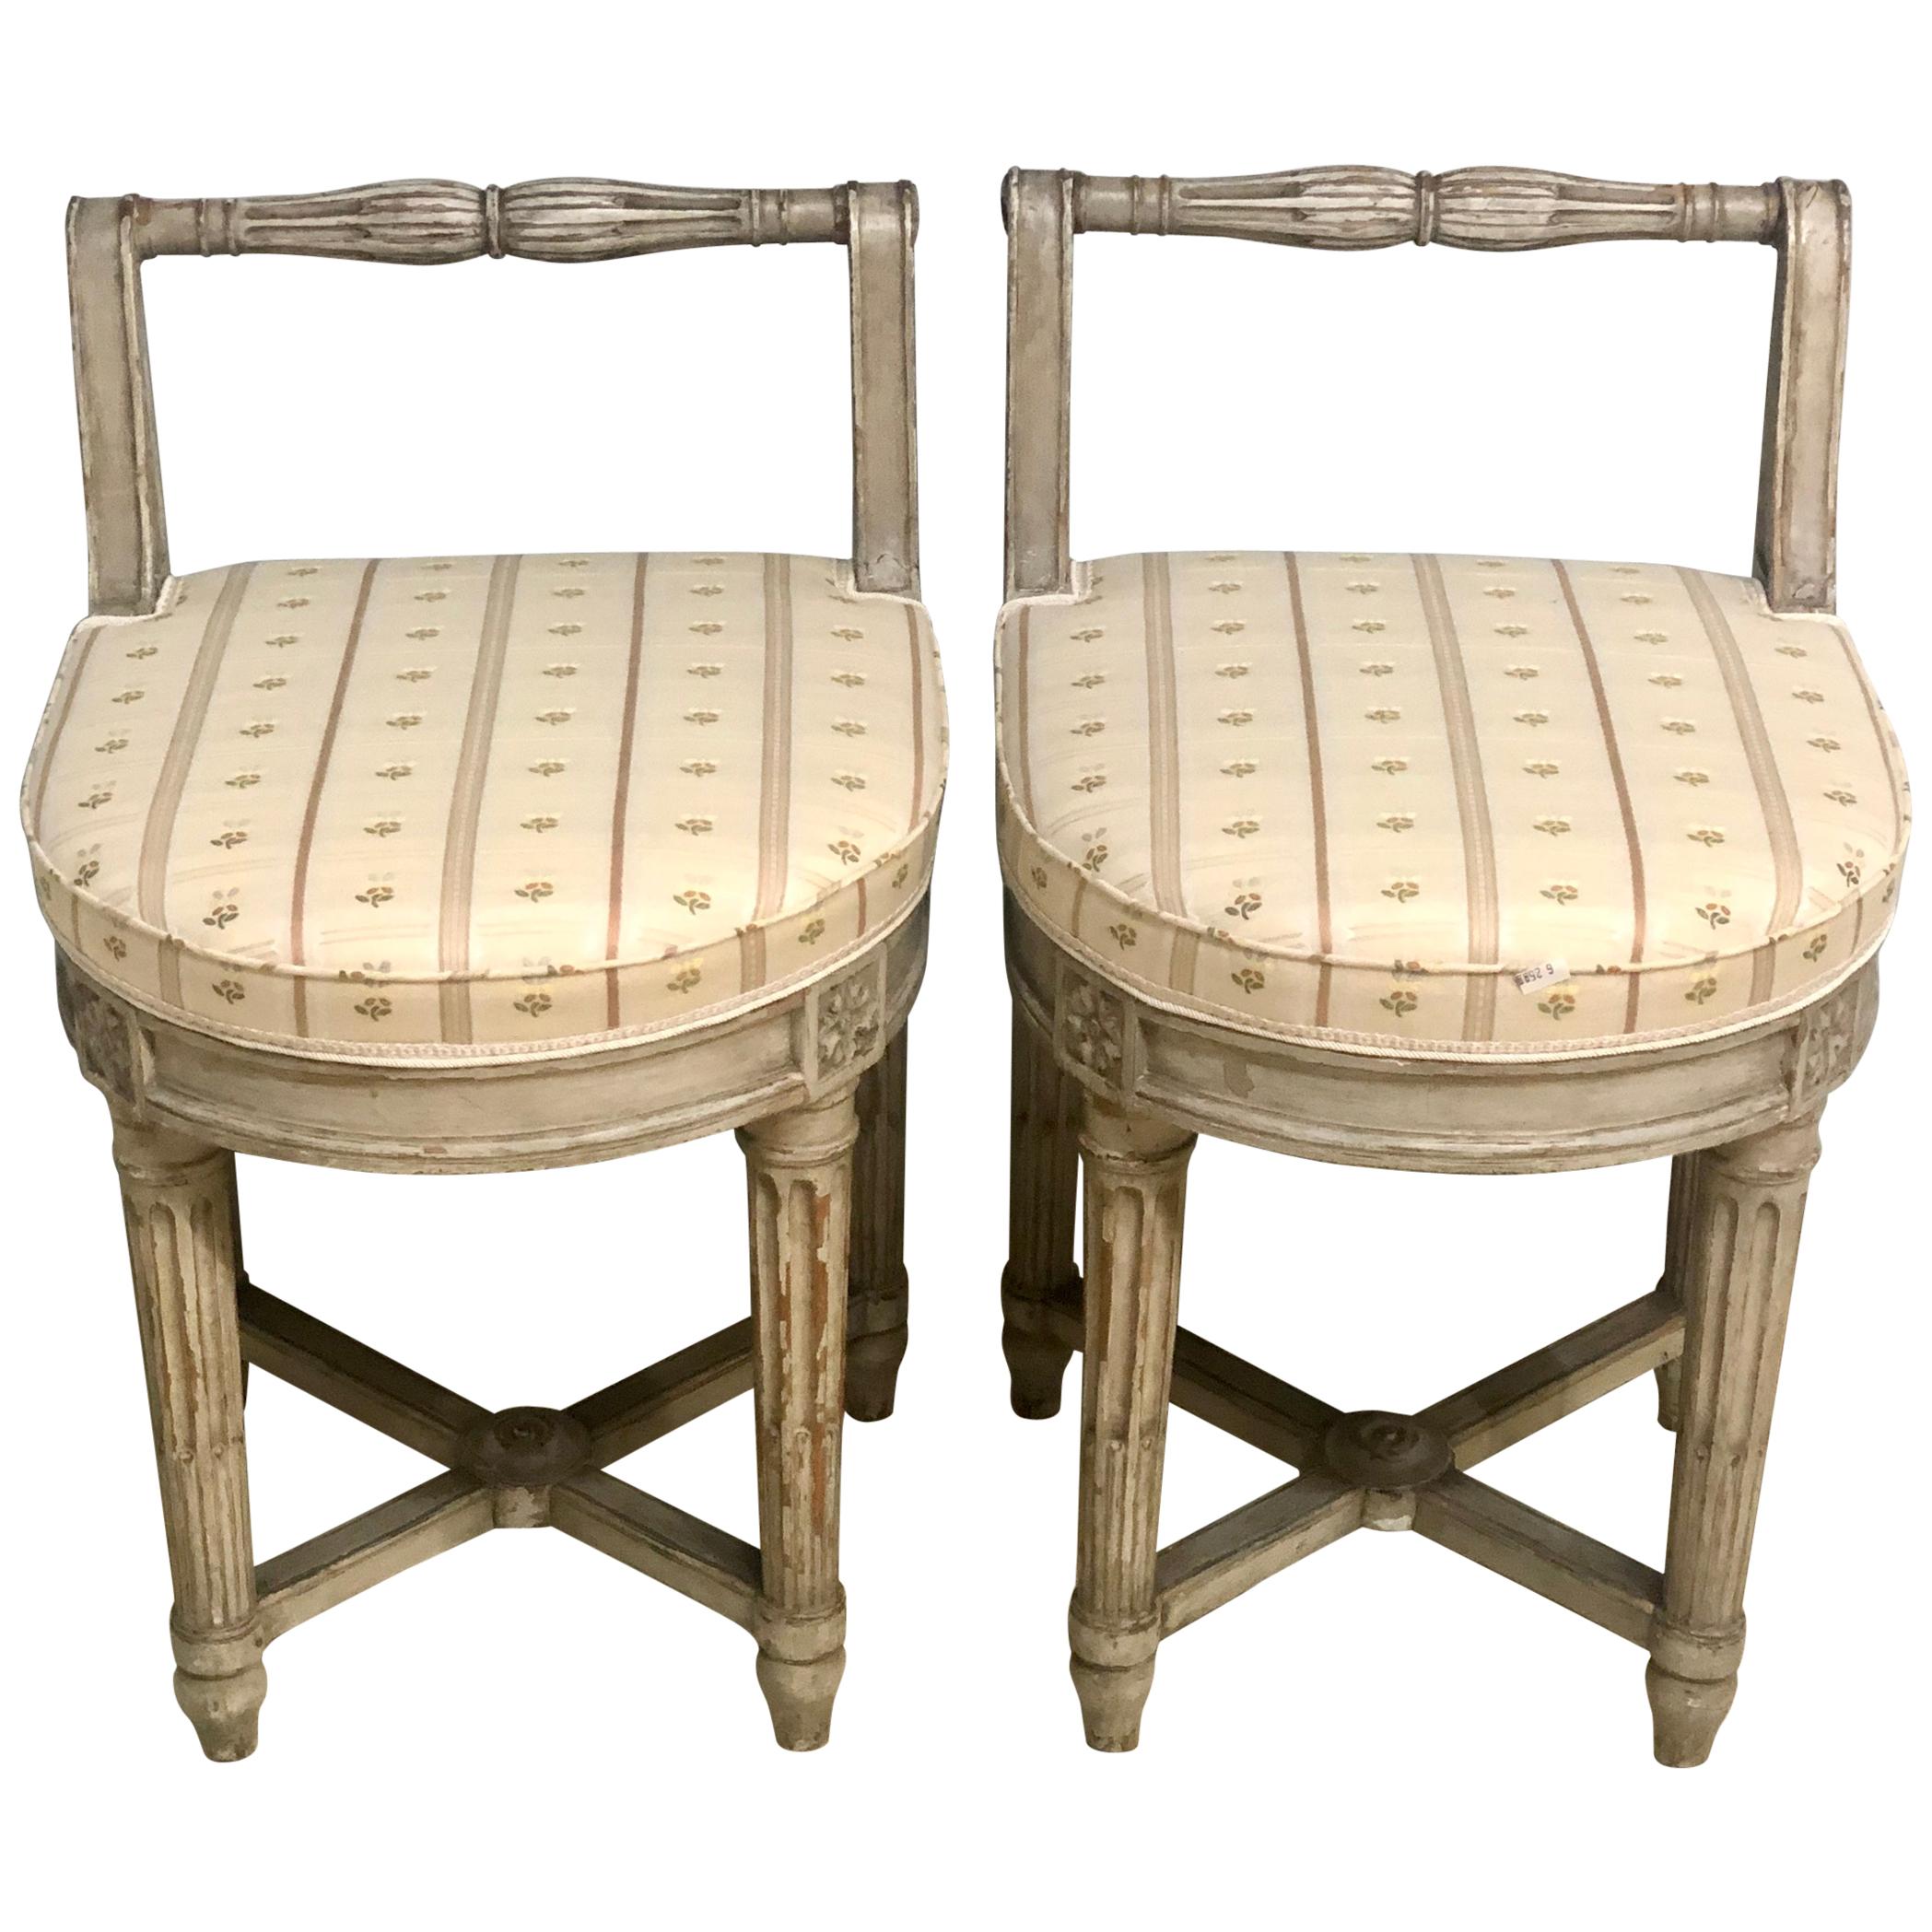 French Design, Louis XVI, Small Chairs, Ivory Painted Wood, Fabric, France 1740s